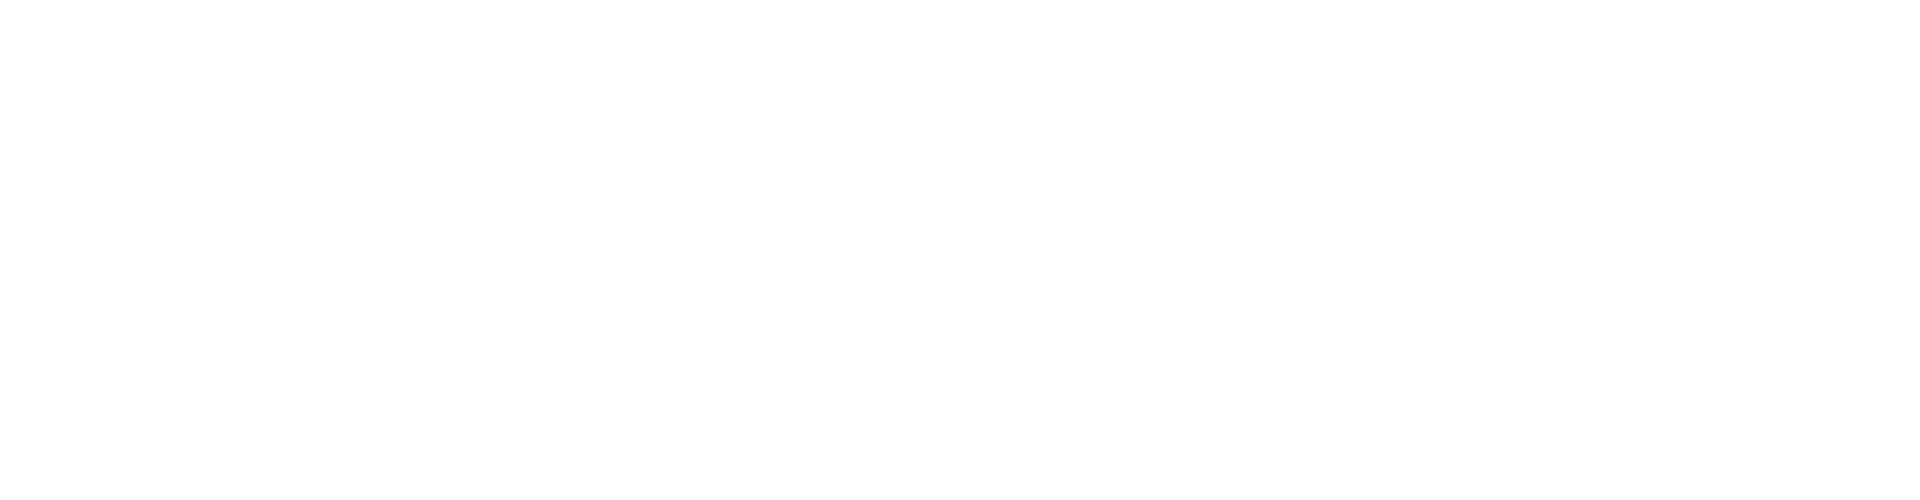 Cootoh logo in white